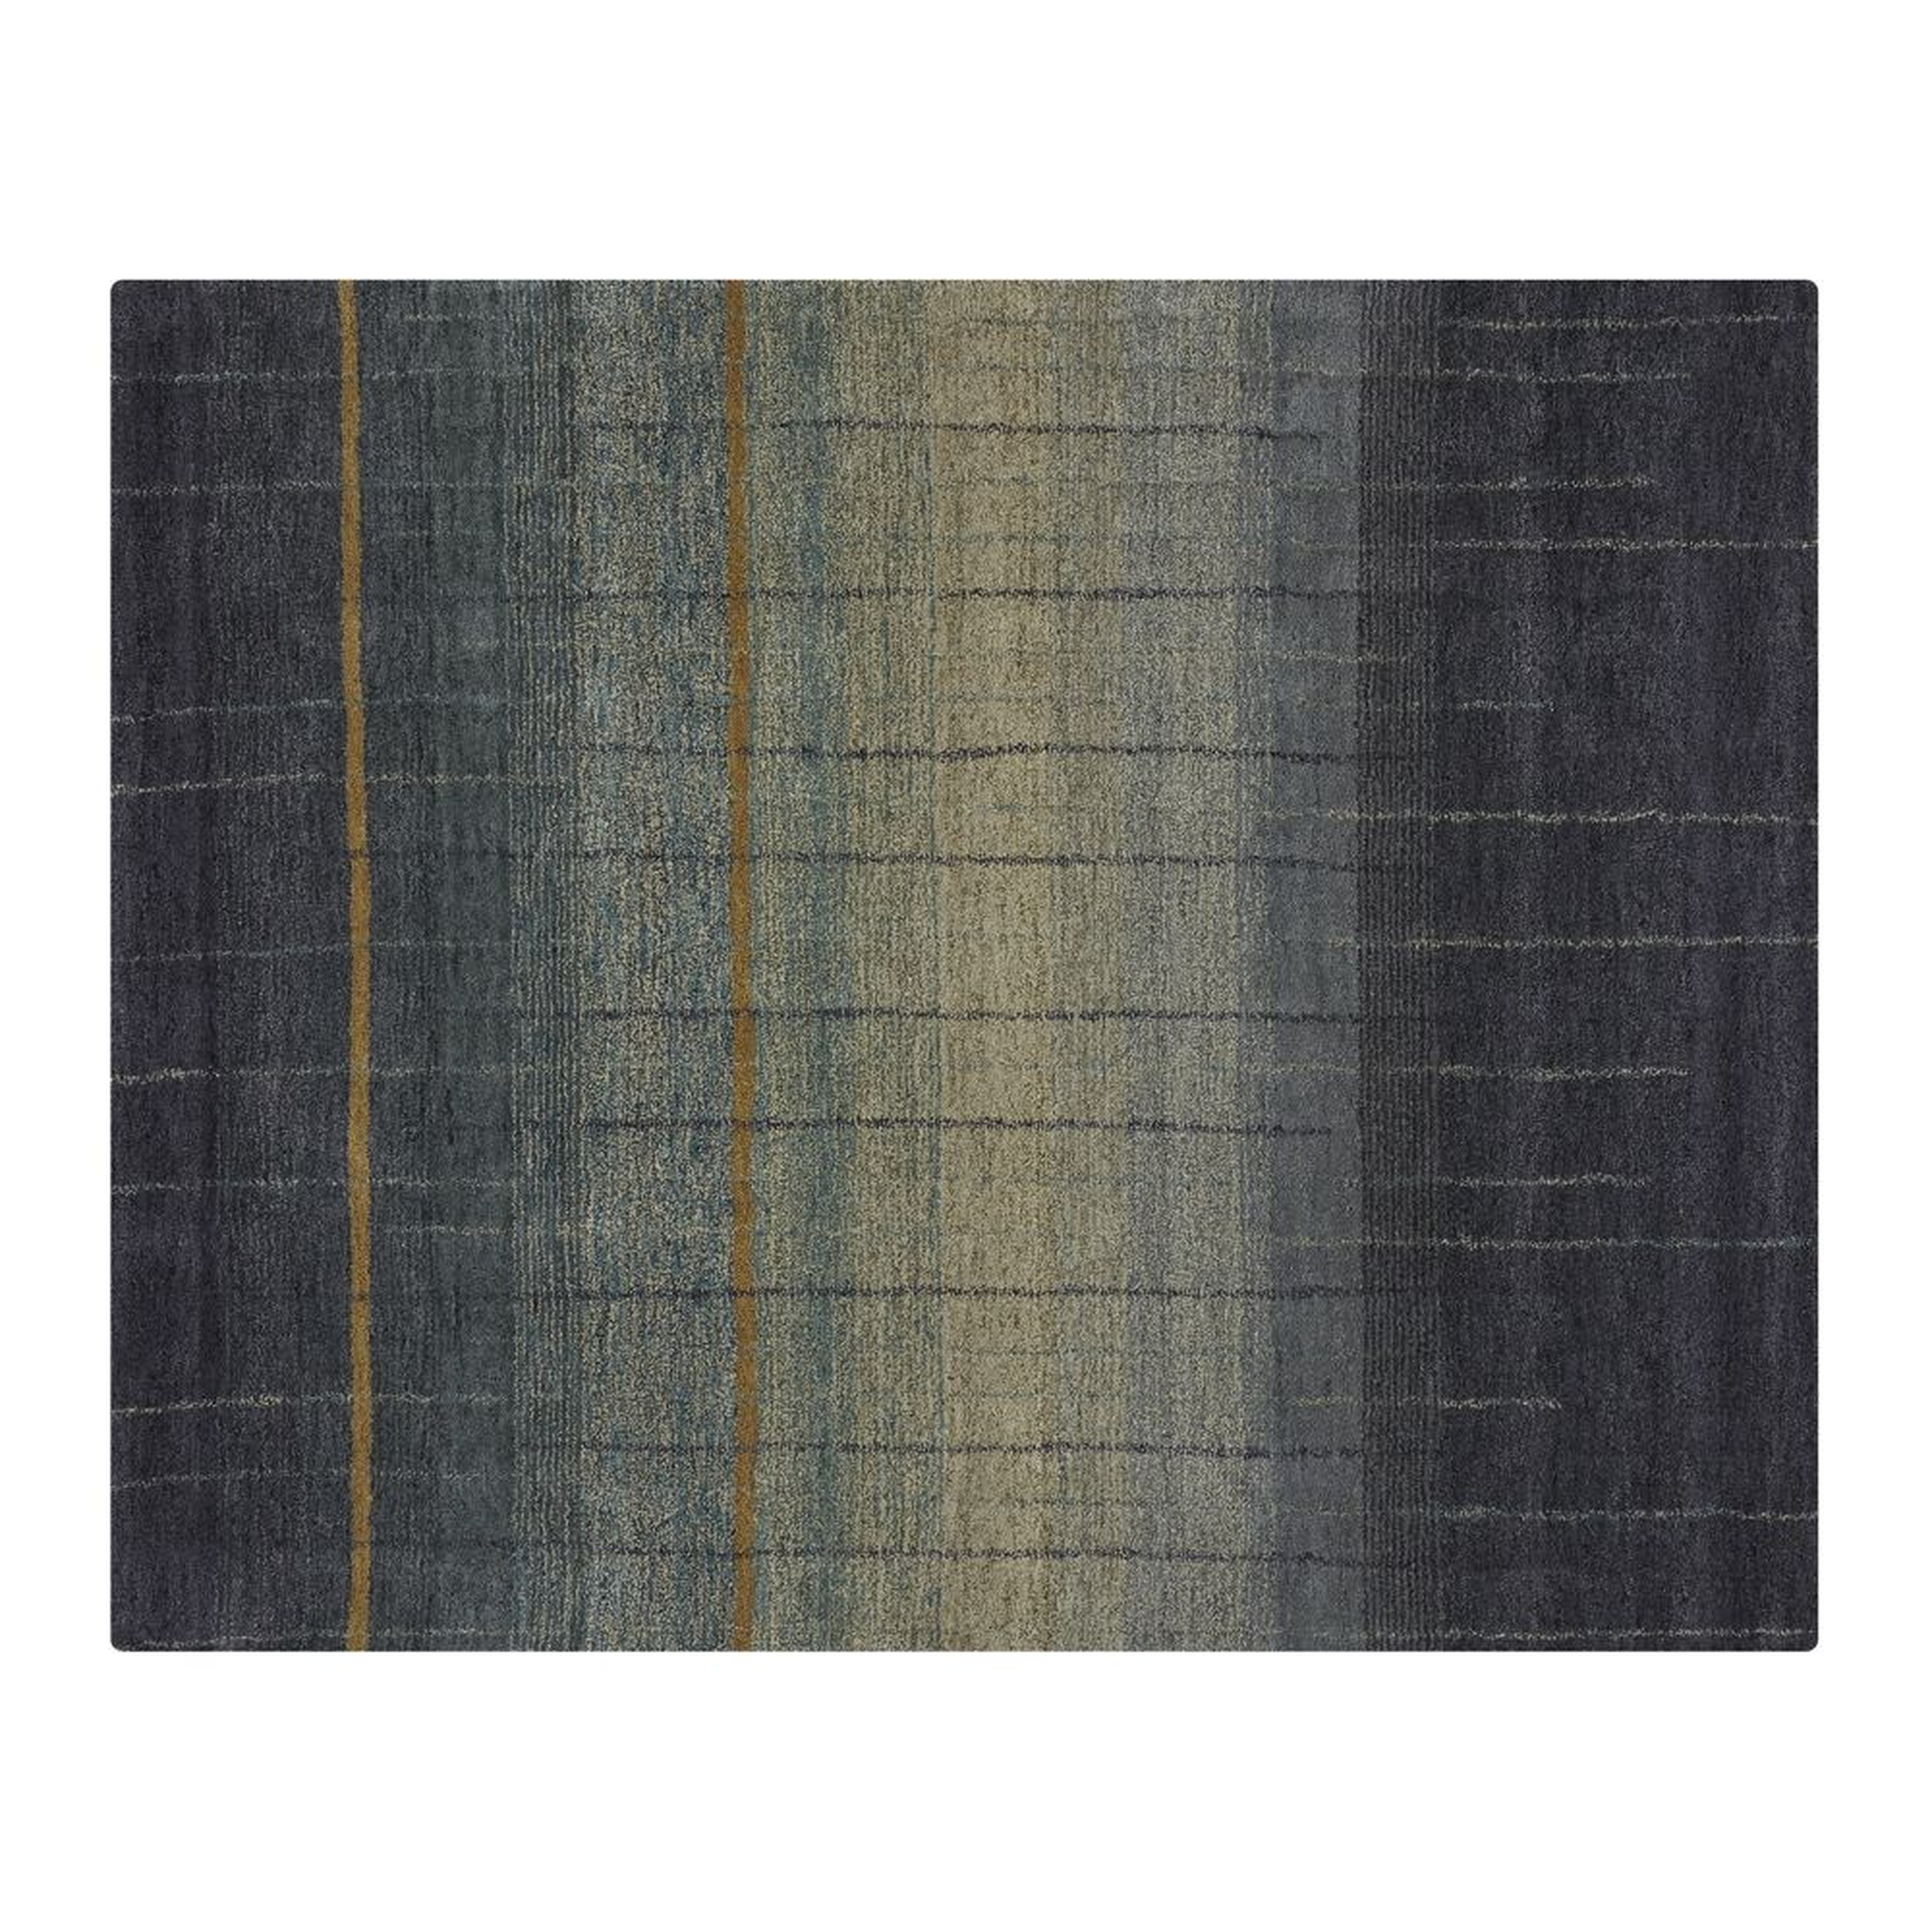 Dillane Ombre Rug 8'x10' - Crate and Barrel